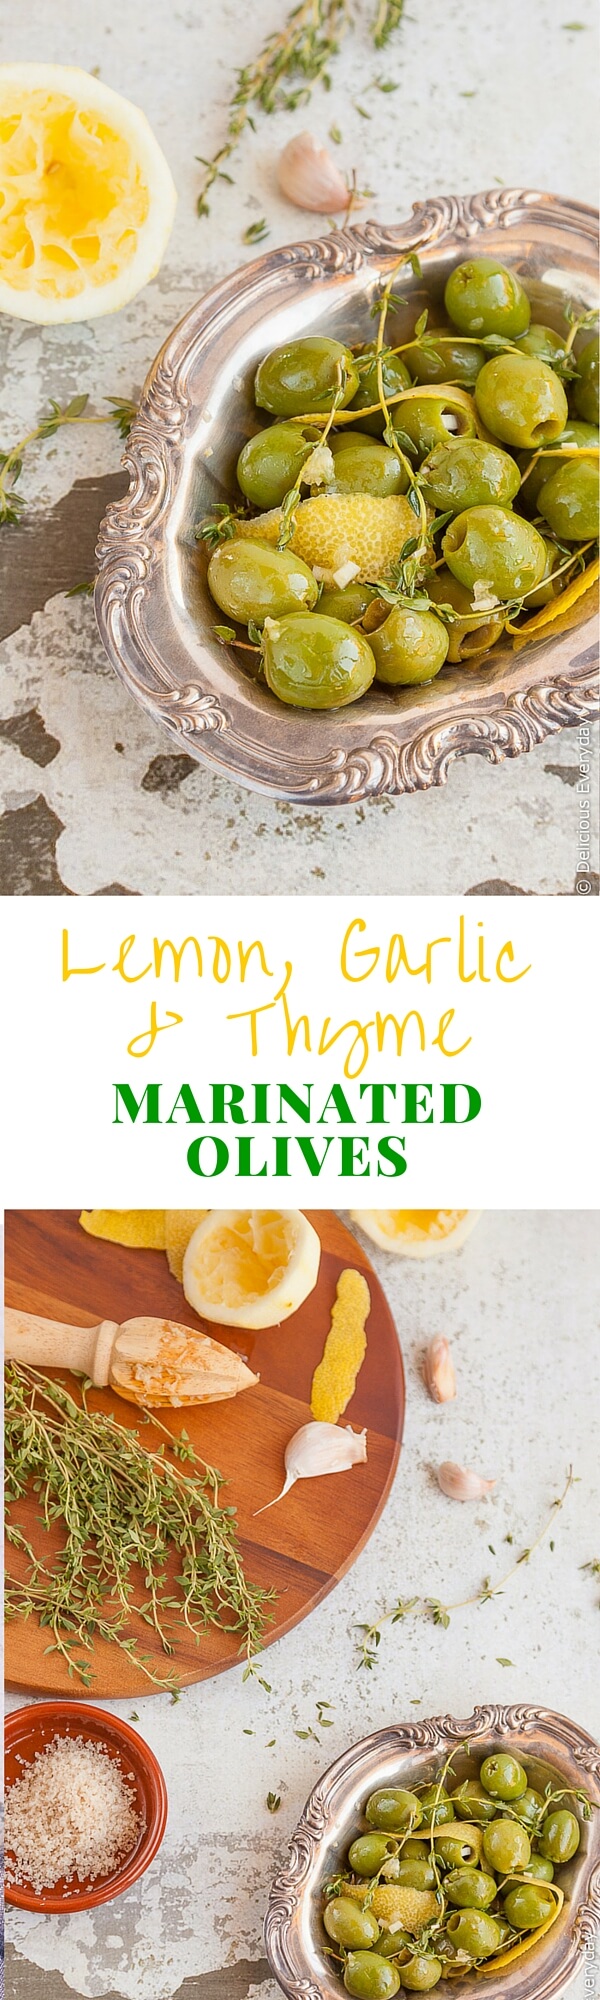 Plump green Sicilian olives are marinated in lemon zest and juice, garlic and thyme for a totally addictive and delicious treat. | Click for the recipe